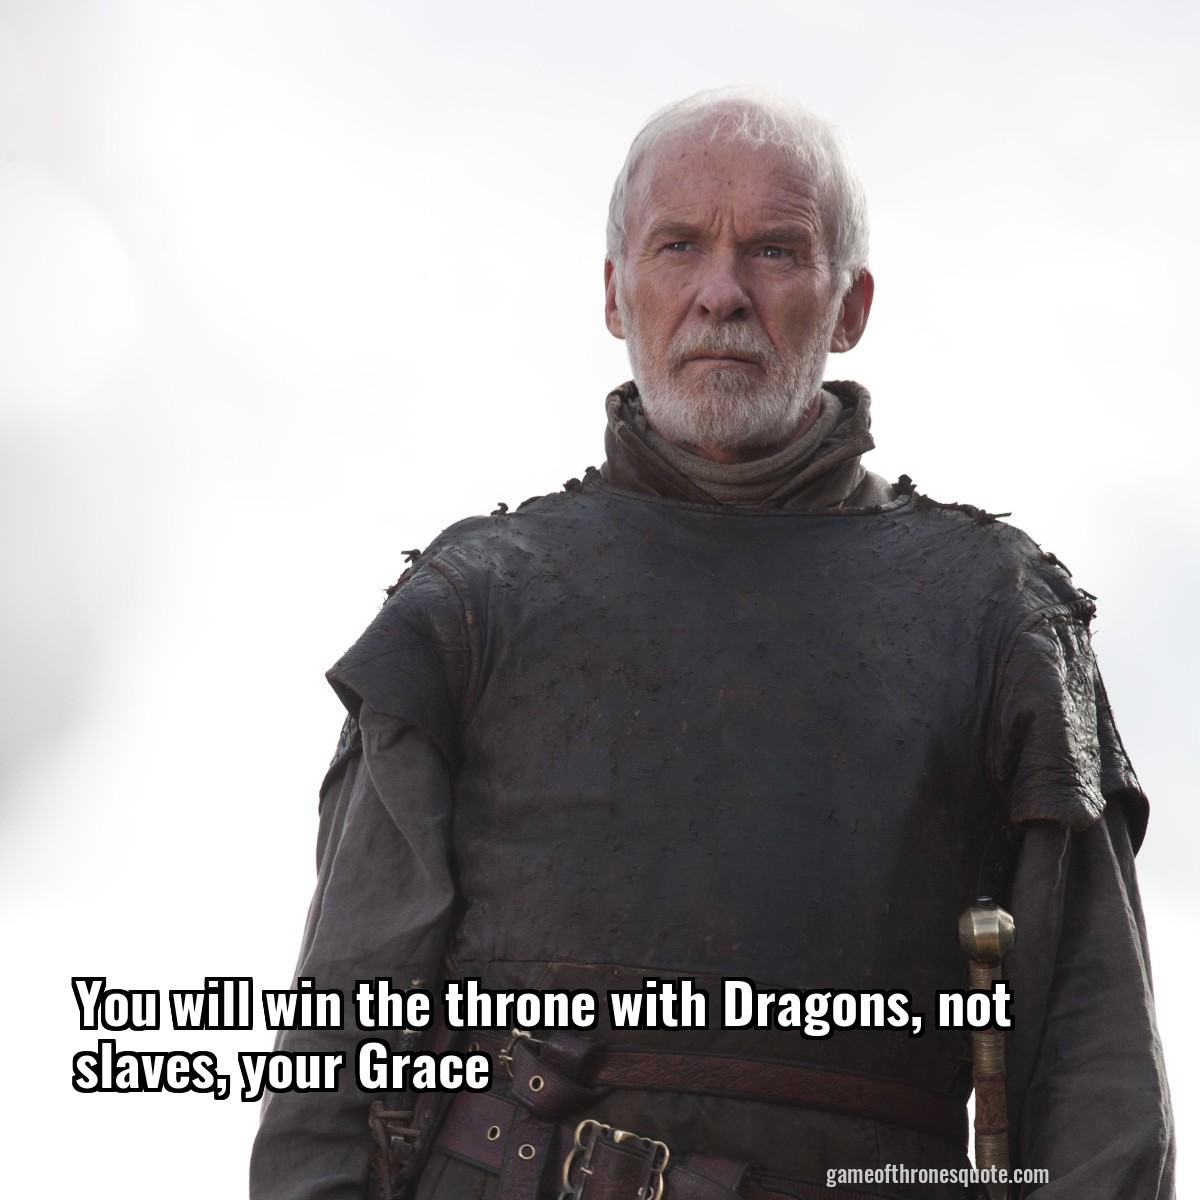 You will win the throne with Dragons, not slaves, your Grace